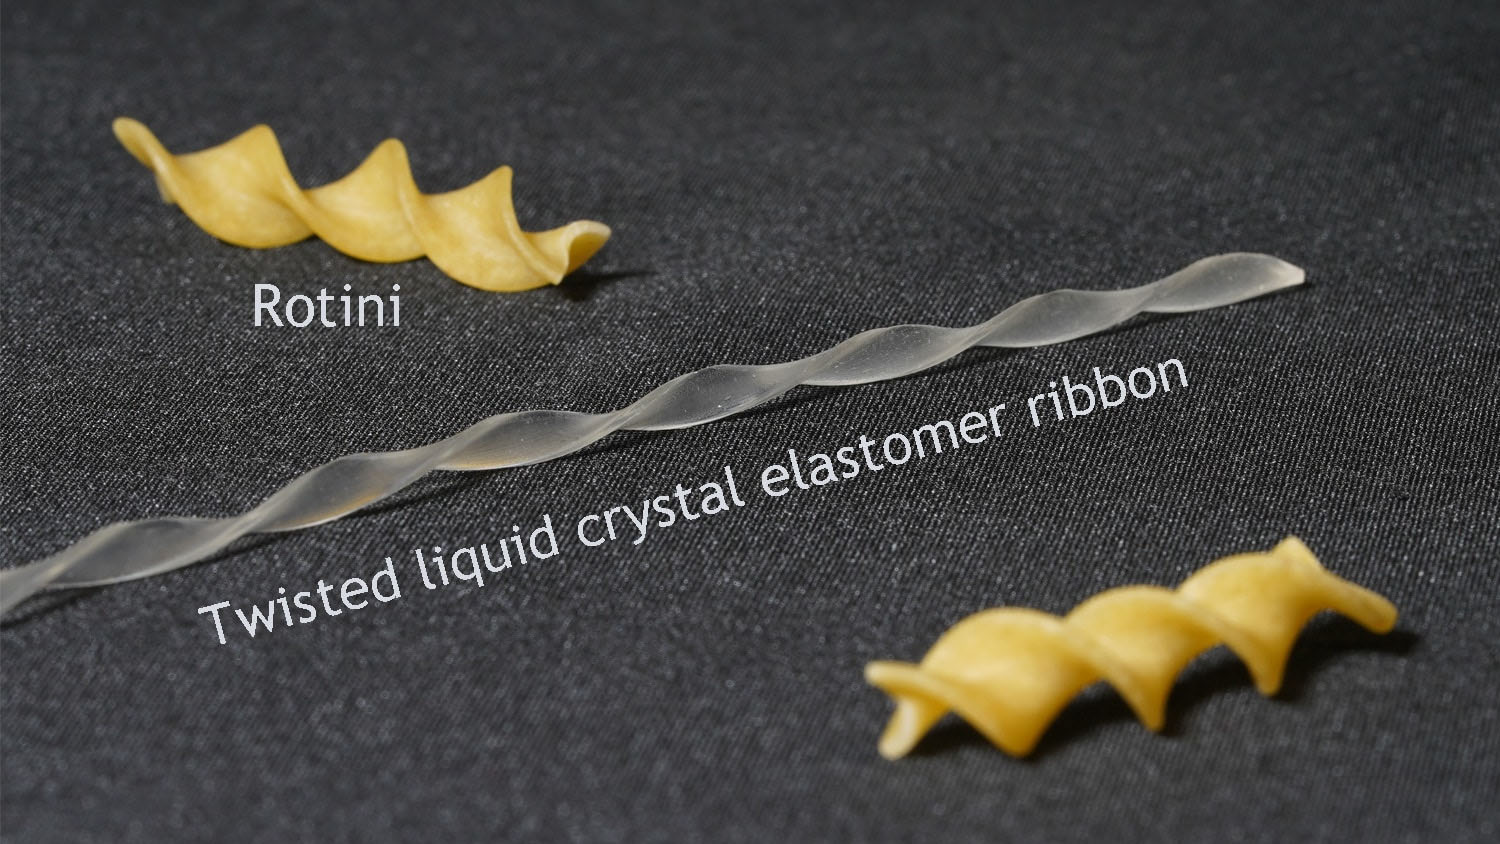 twisted shape of a soft robot resembles rotini pasta